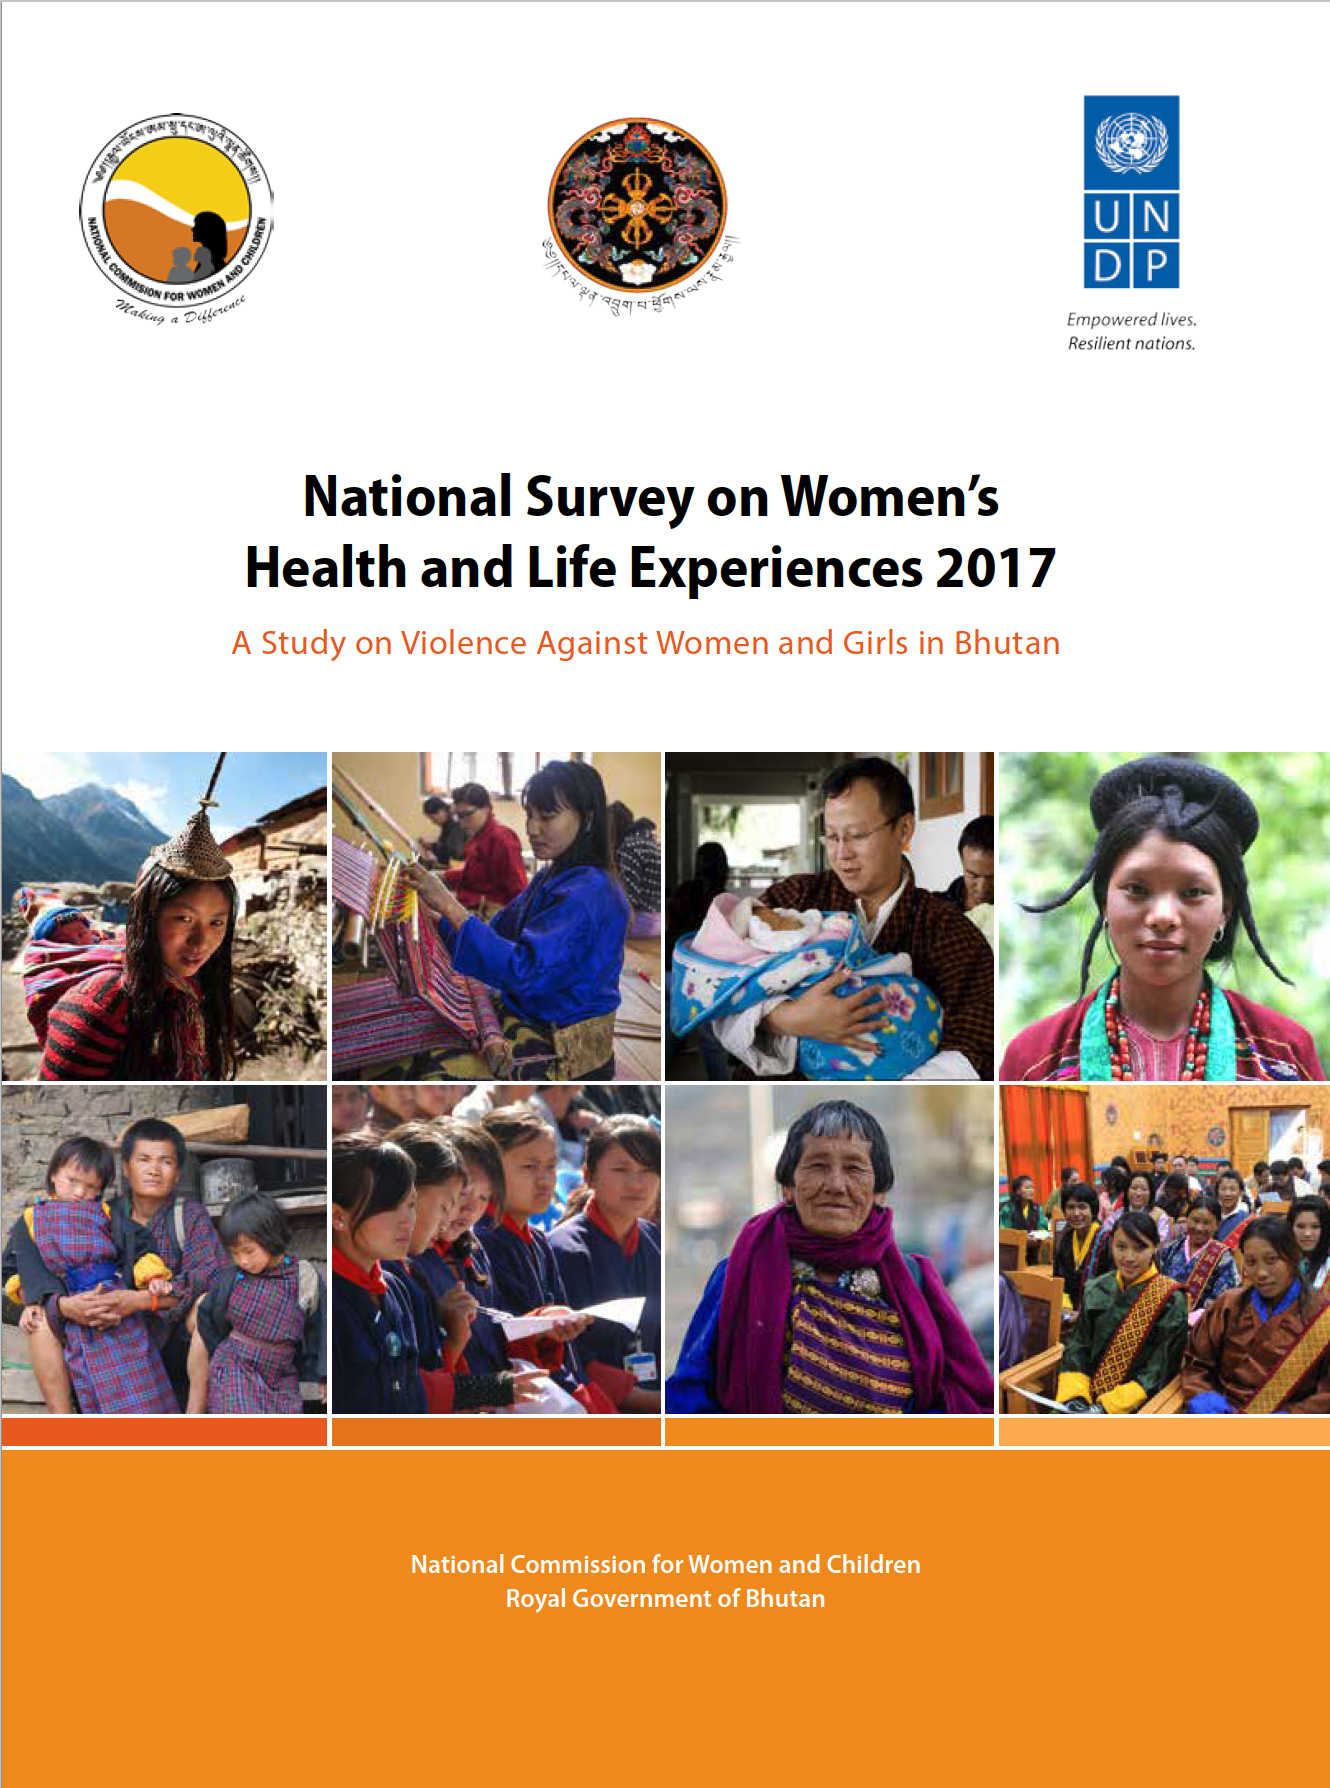 National Survey on Women’s Health and Life Experiences 2017 in Bhutan report cover